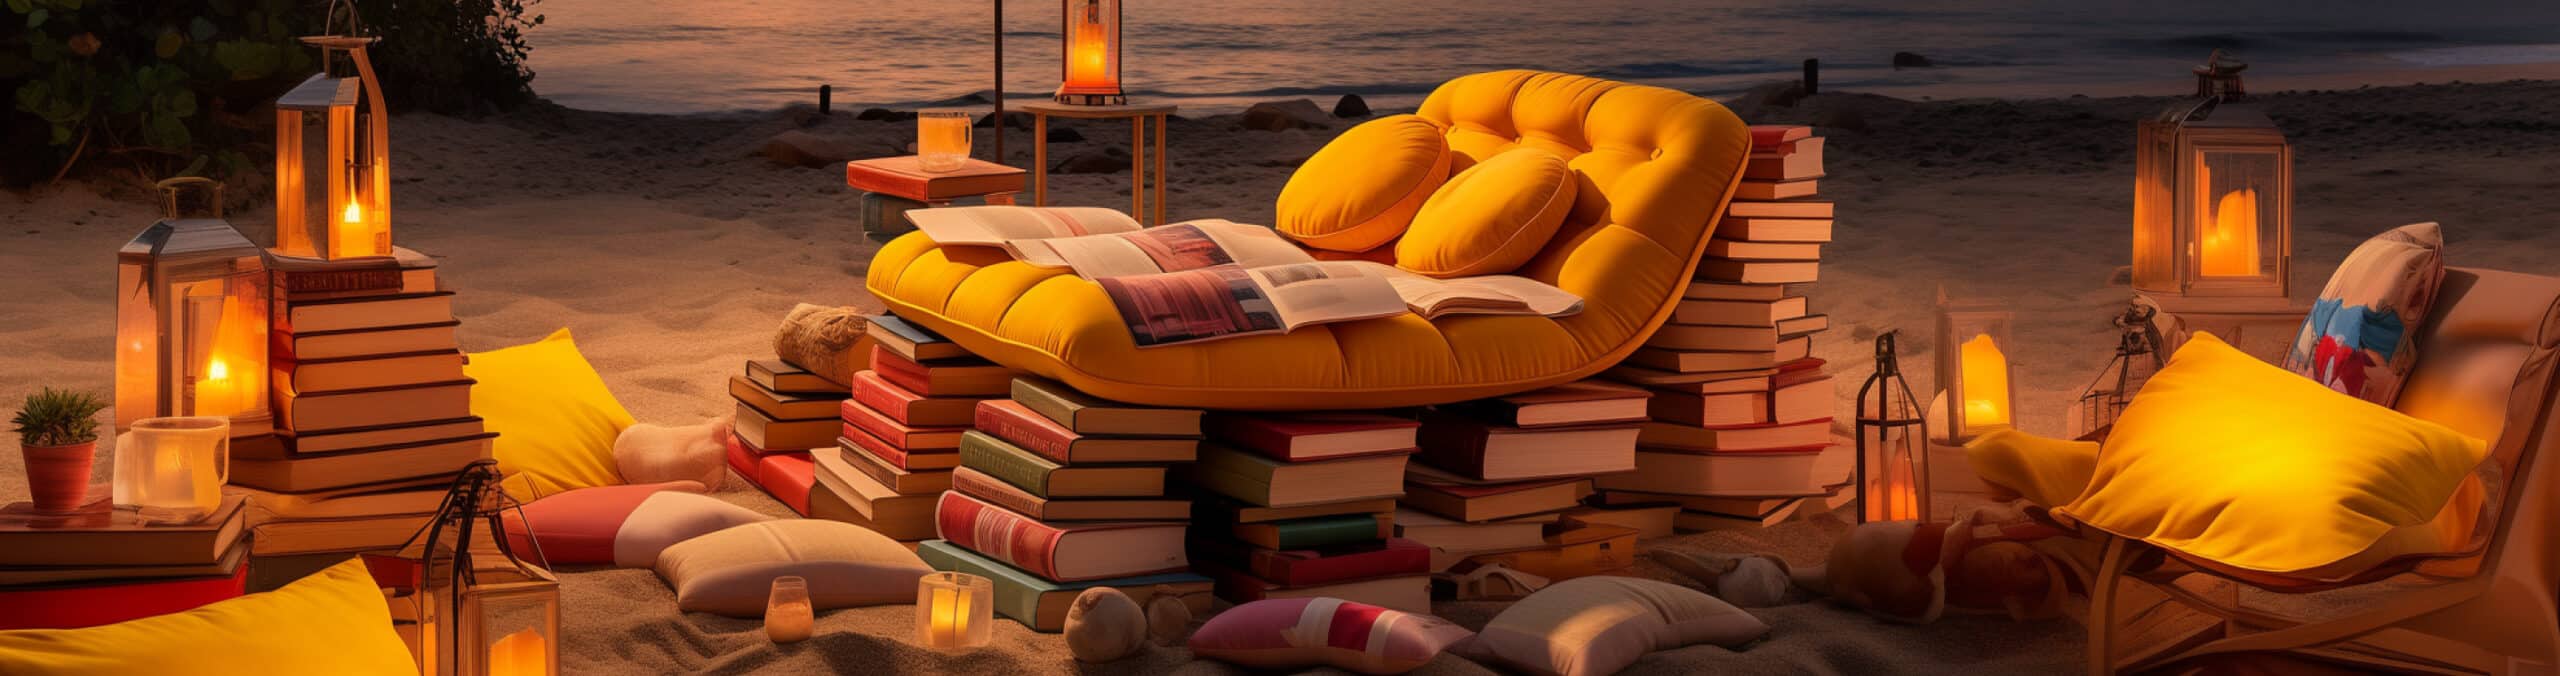 Is it better to read at night or in the morning?